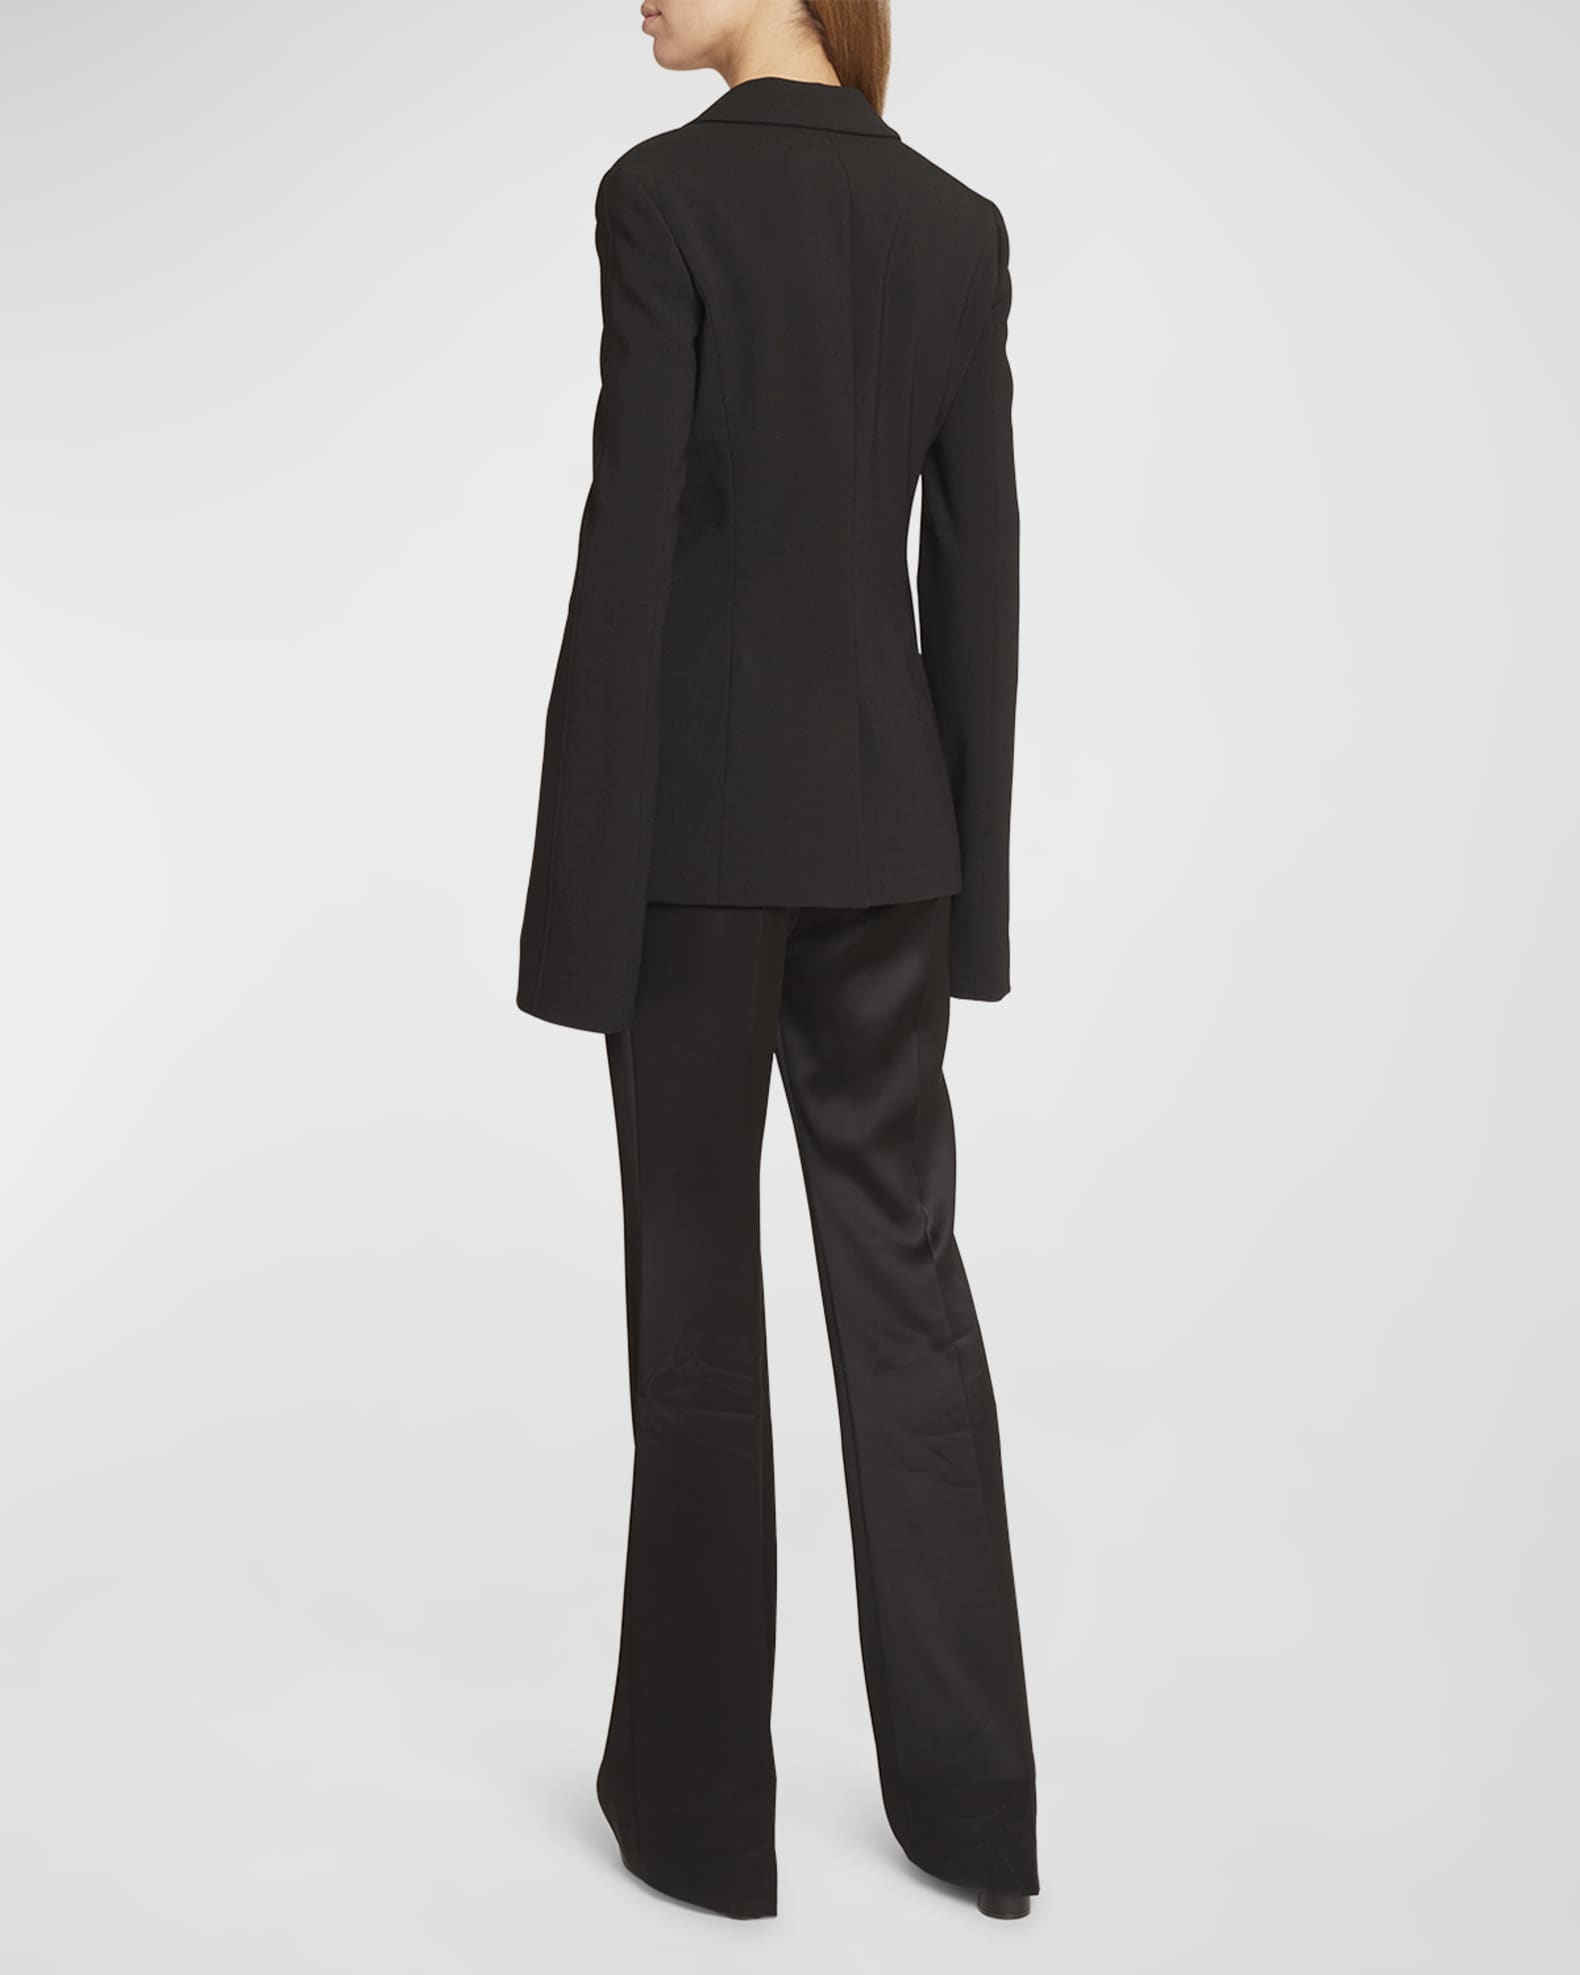 Givenchy Wool Blazer Jacket with Bell Sleeves | Neiman Marcus